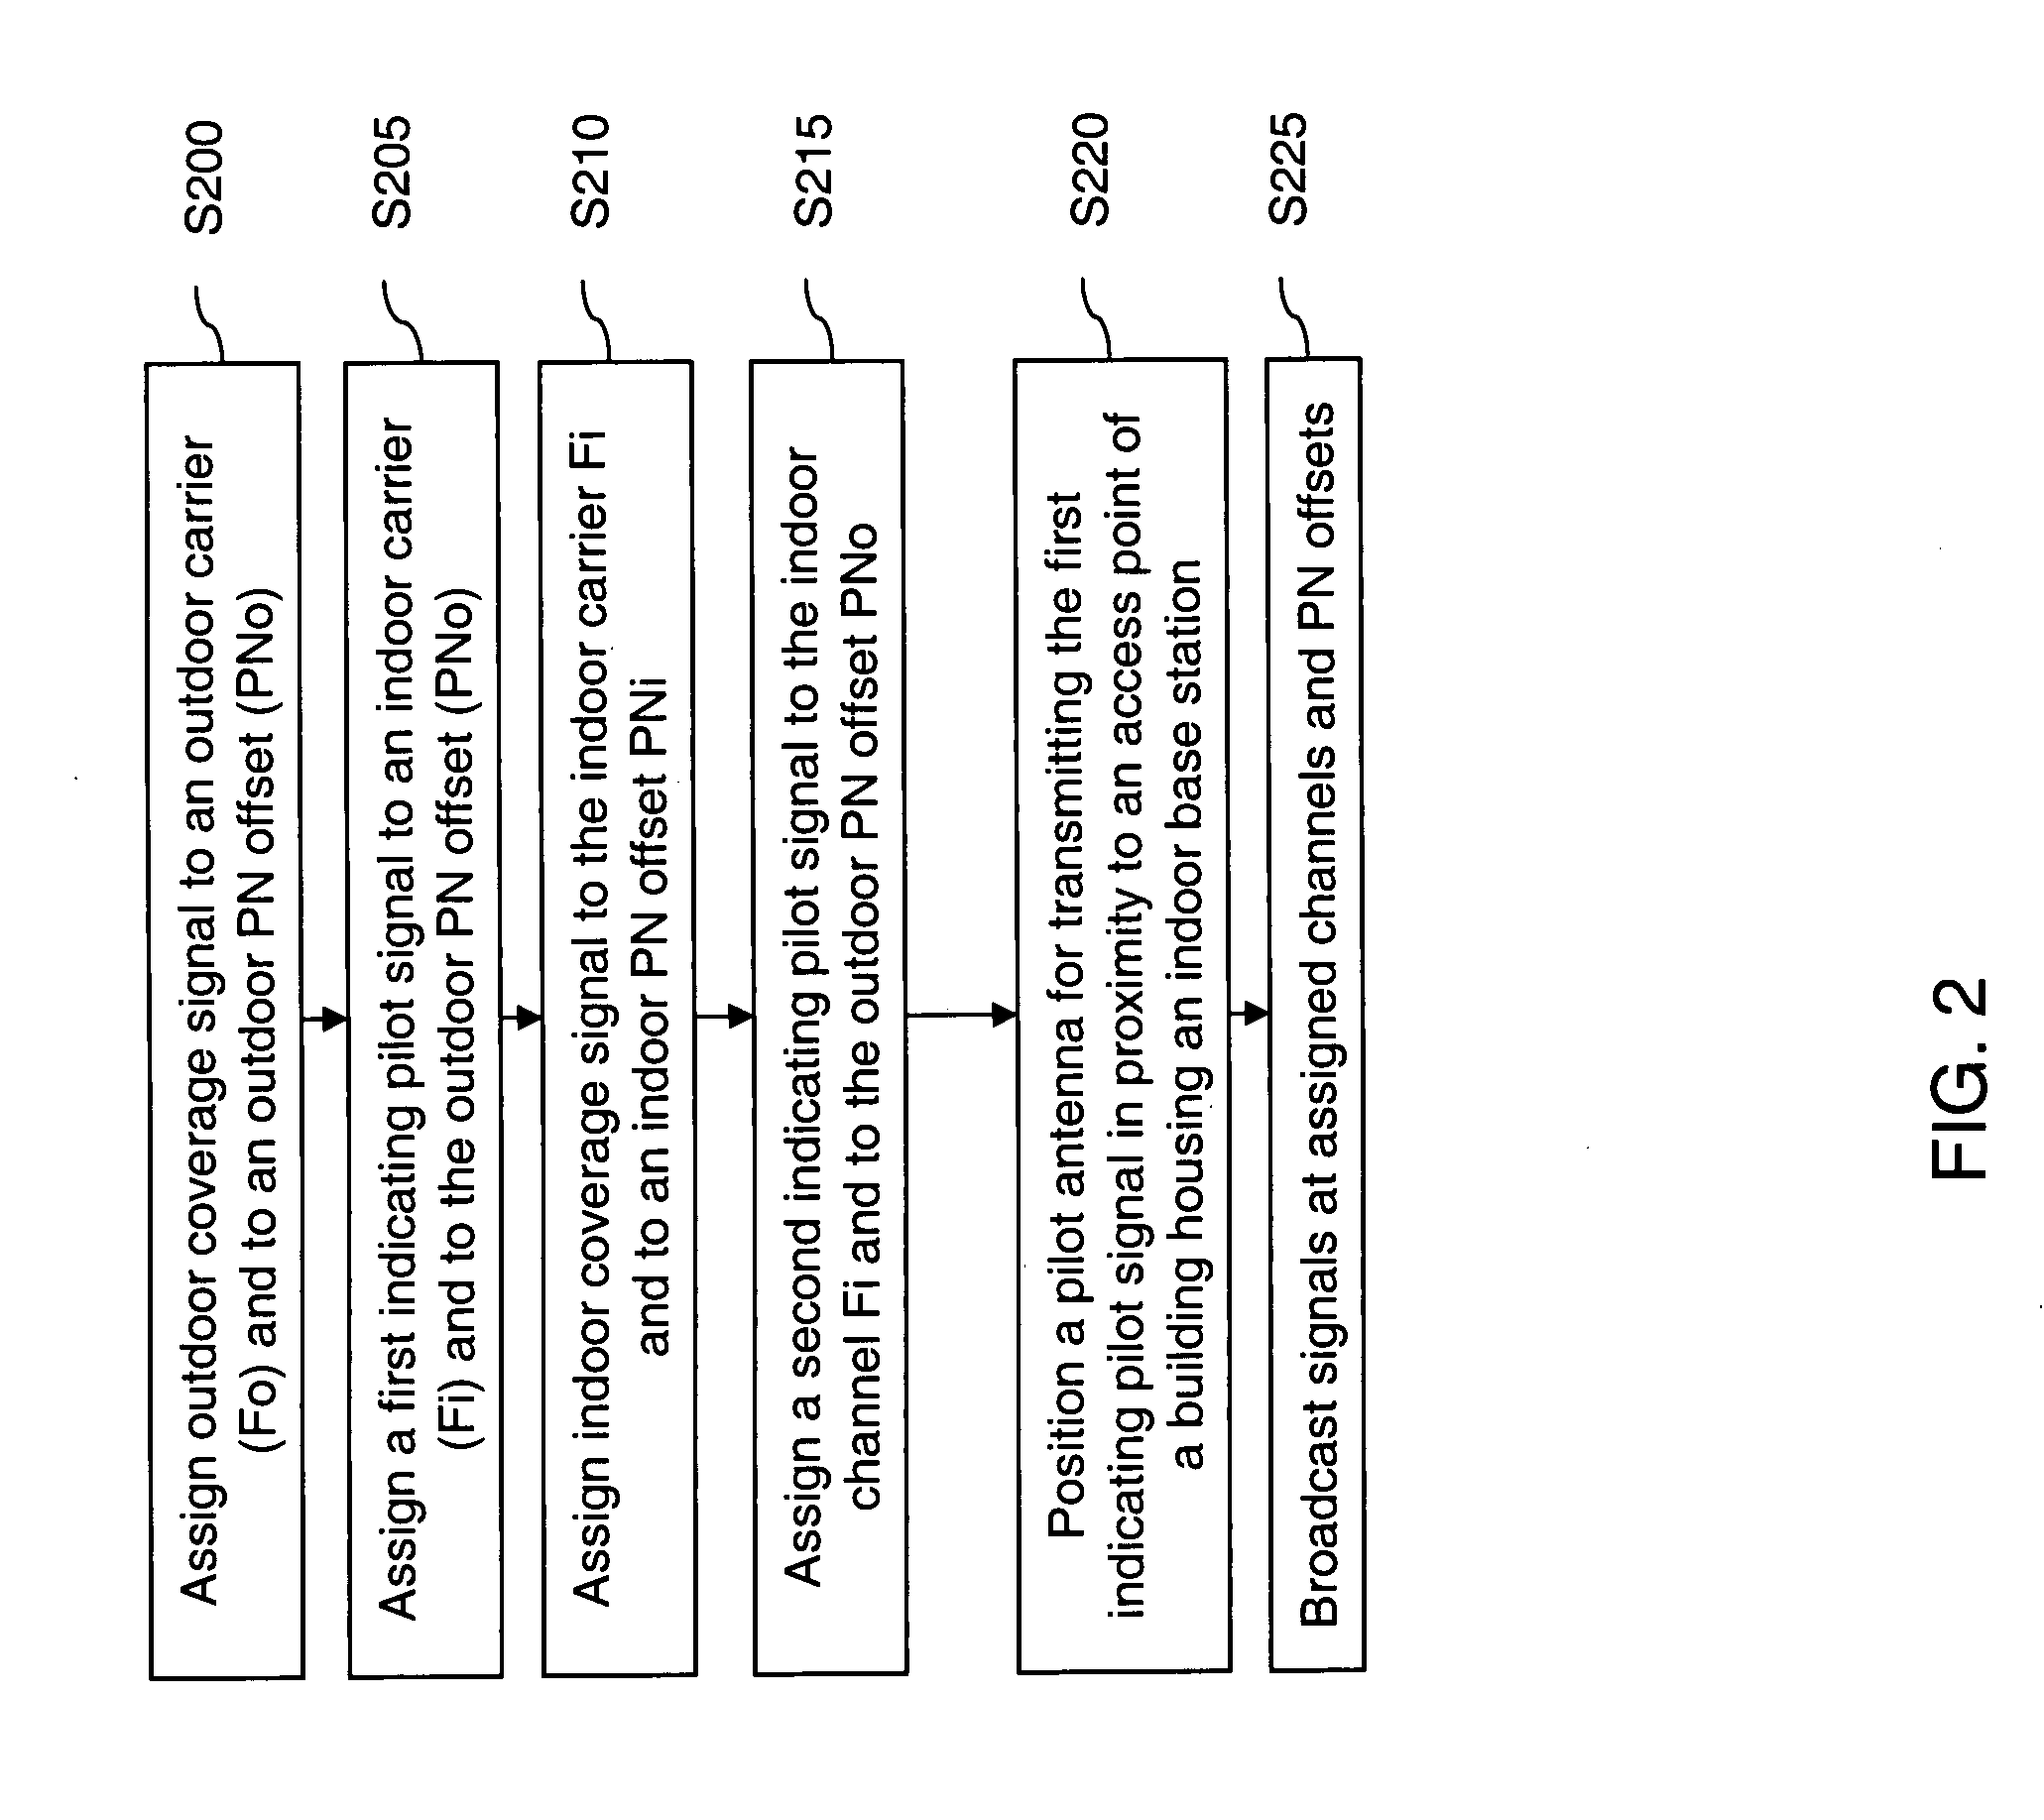 Methods of handling coverage within a wireless communications system